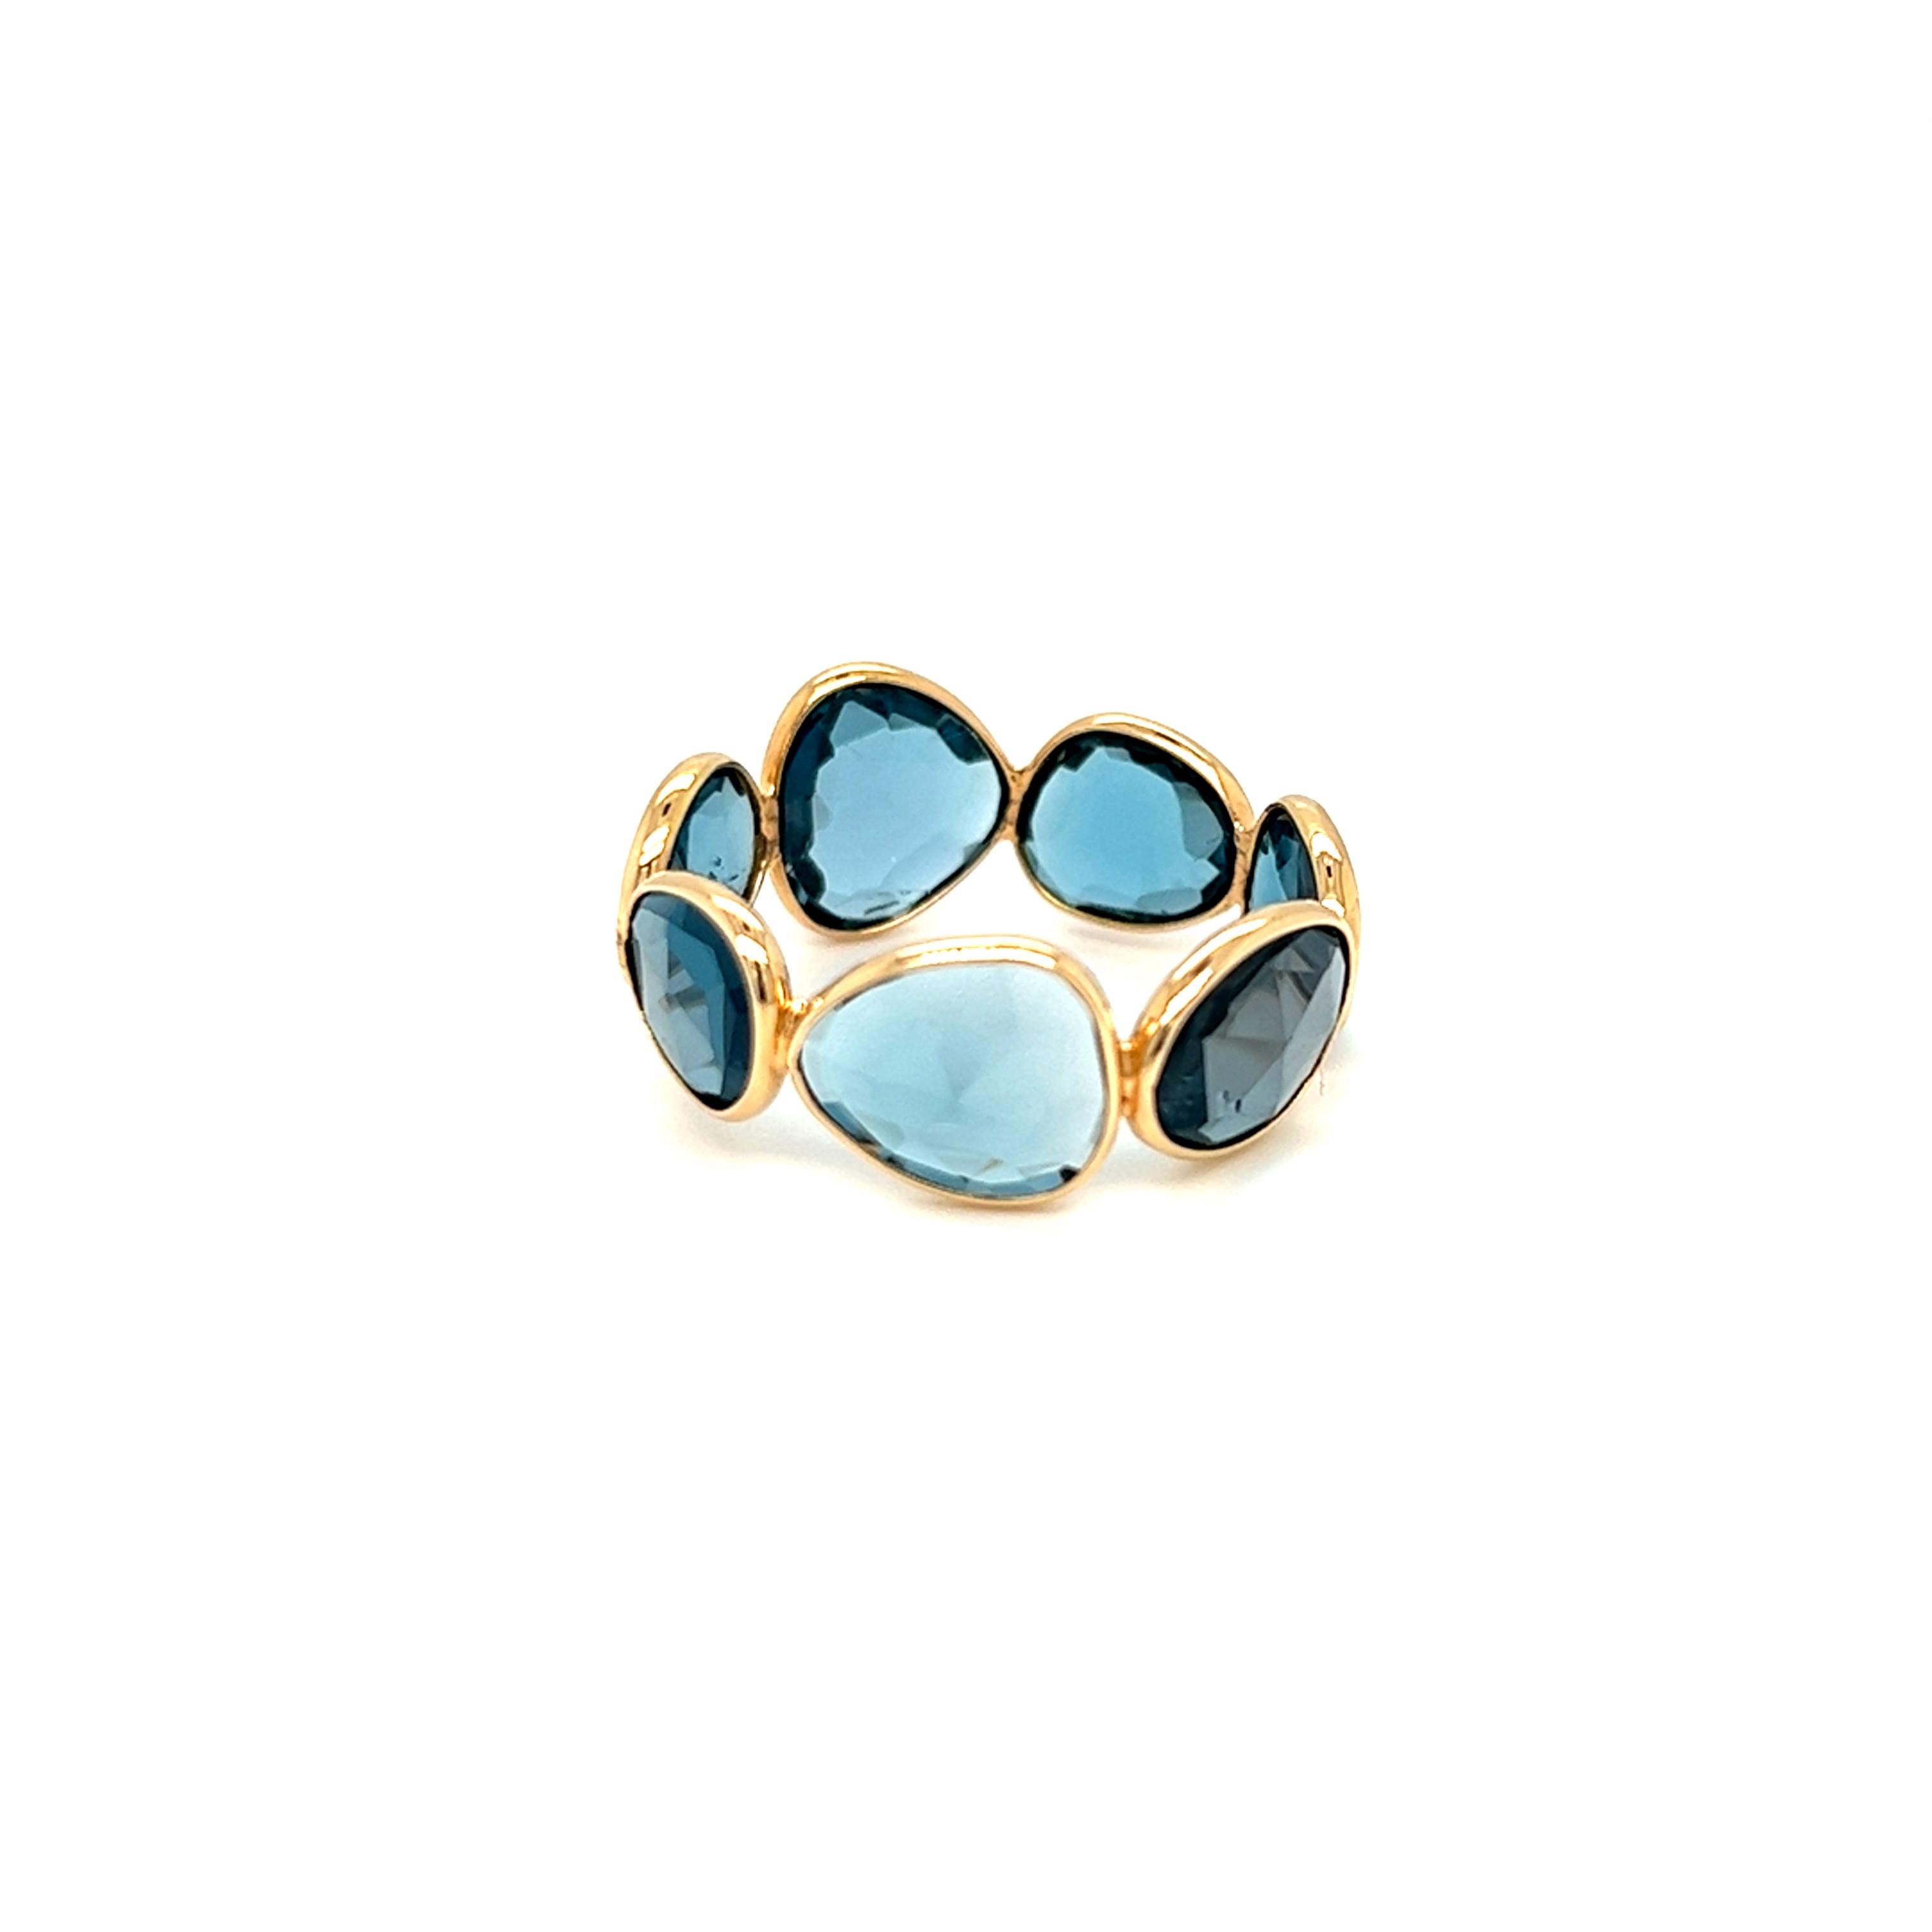 Artistically handcrafted in 18K yellow gold, these beautiful one of a kind London Blue Topaz is hand set in simple bezel setting.  Total weight of the stones is 11 carats. The width of the band at the widest point is 10mm. The ring is in size 9.25